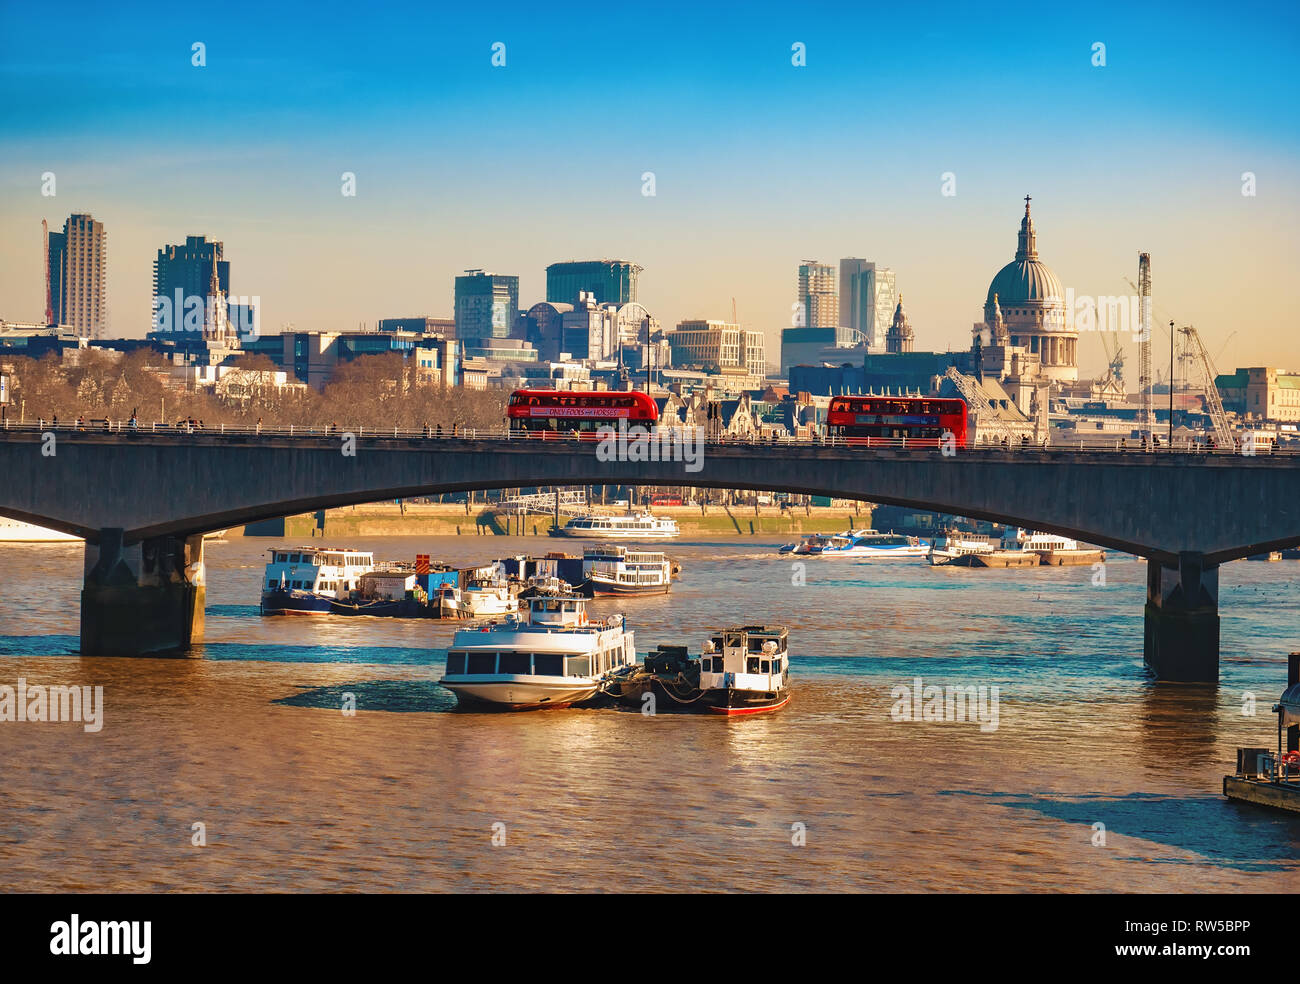 London, England, UK - February 25, 2019: Cityscape view with the Blackfriars bridge and famous Thames river in London in a daytime Stock Photo